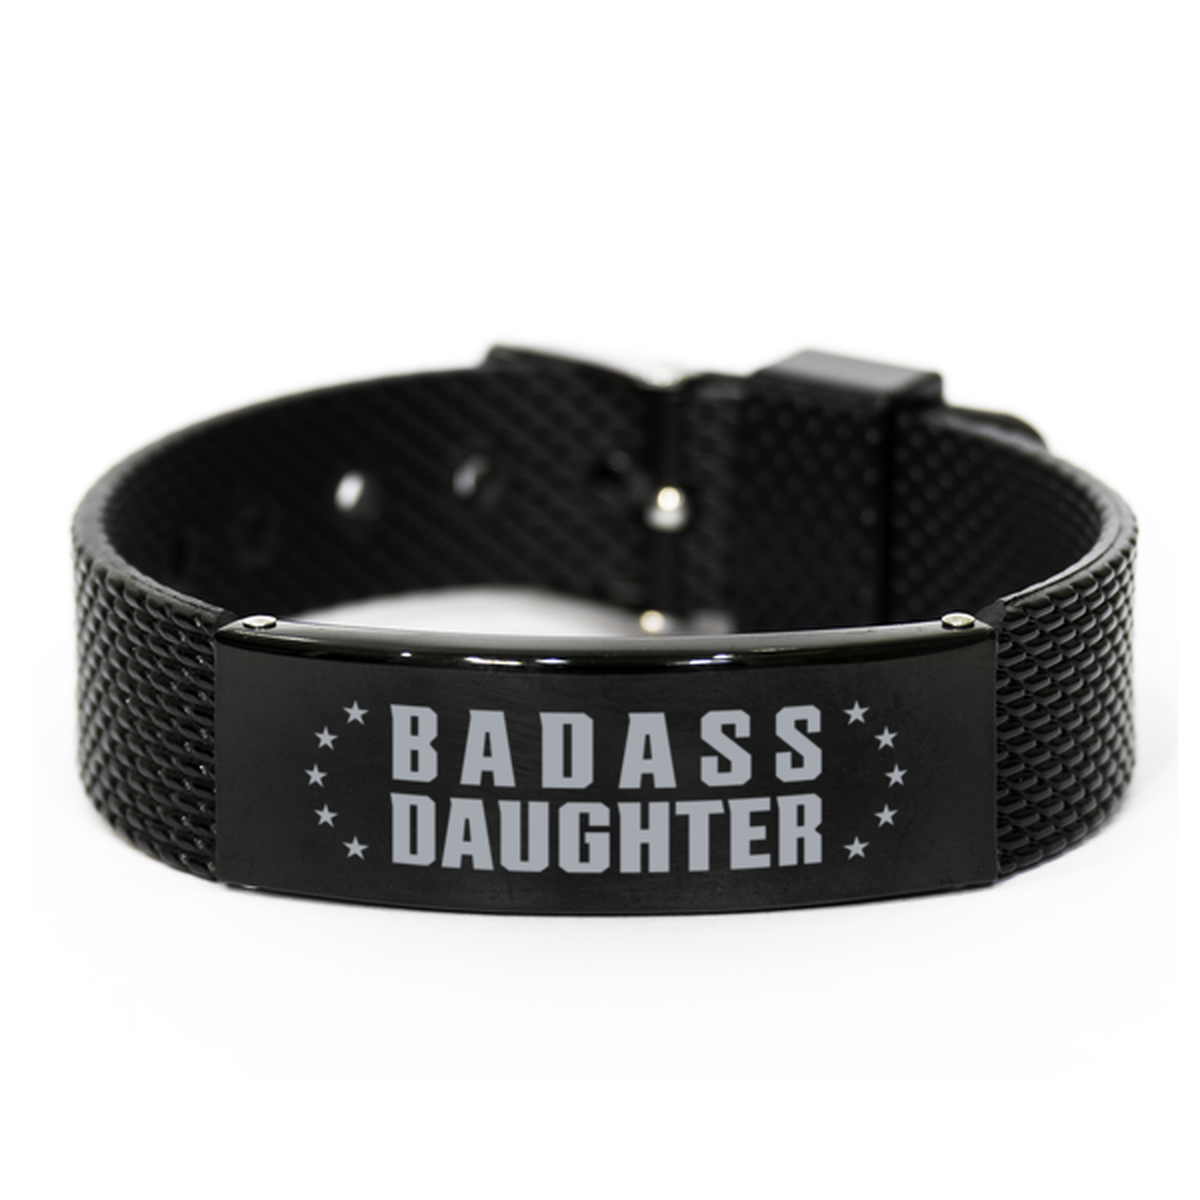 Daughter Black Shark Mesh Bracelet, Badass Daughter, Funny Family Gifts For Daughter From Mom Dad